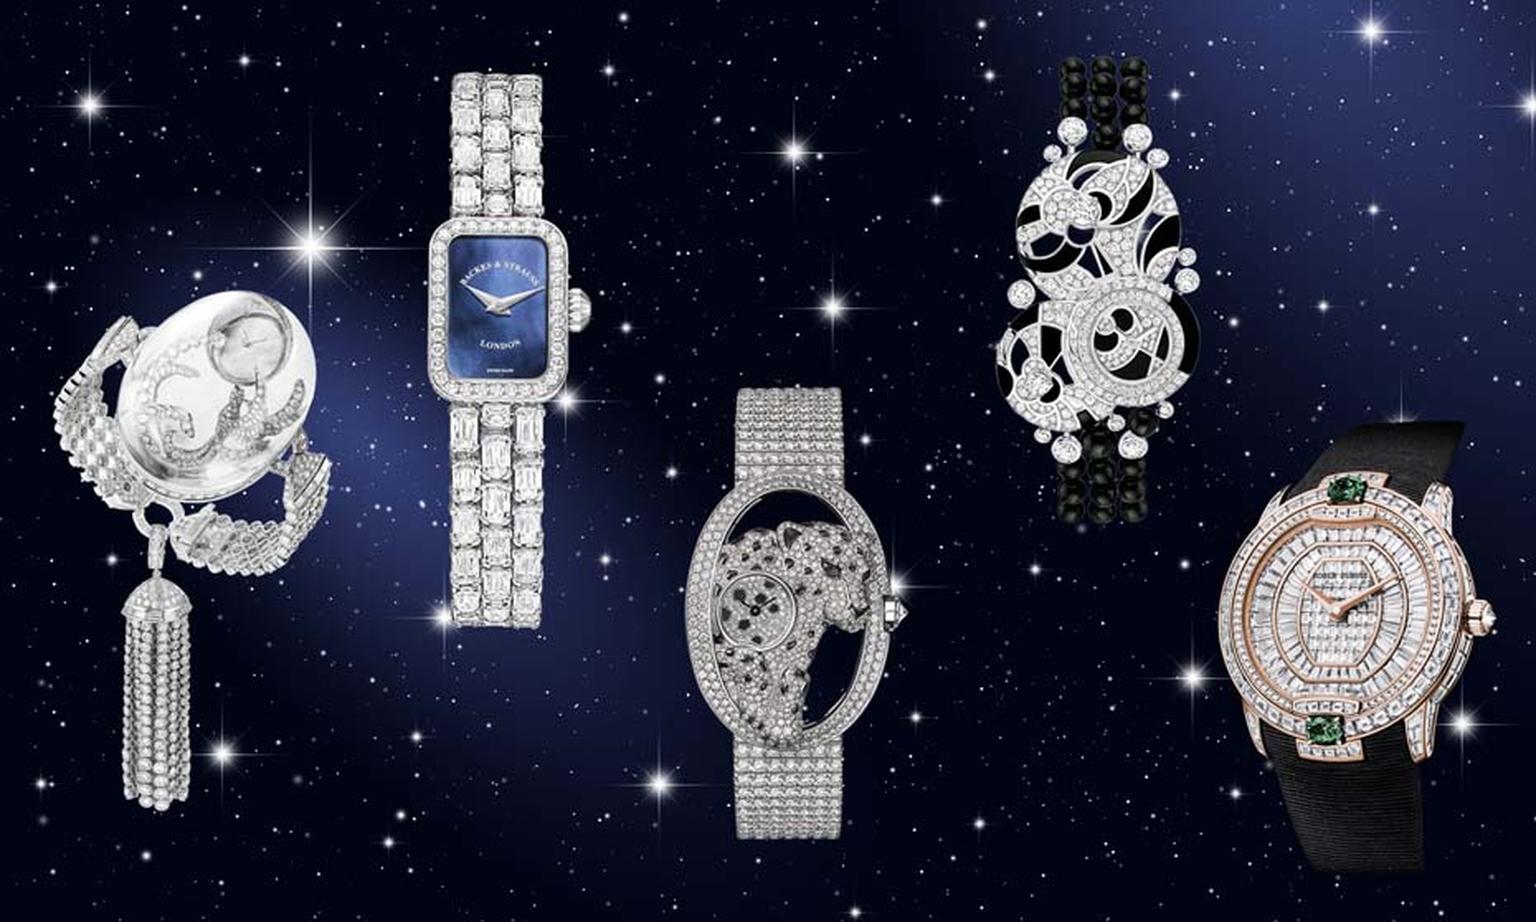 Diamond high jewellery watches: walking in a sparkling winter